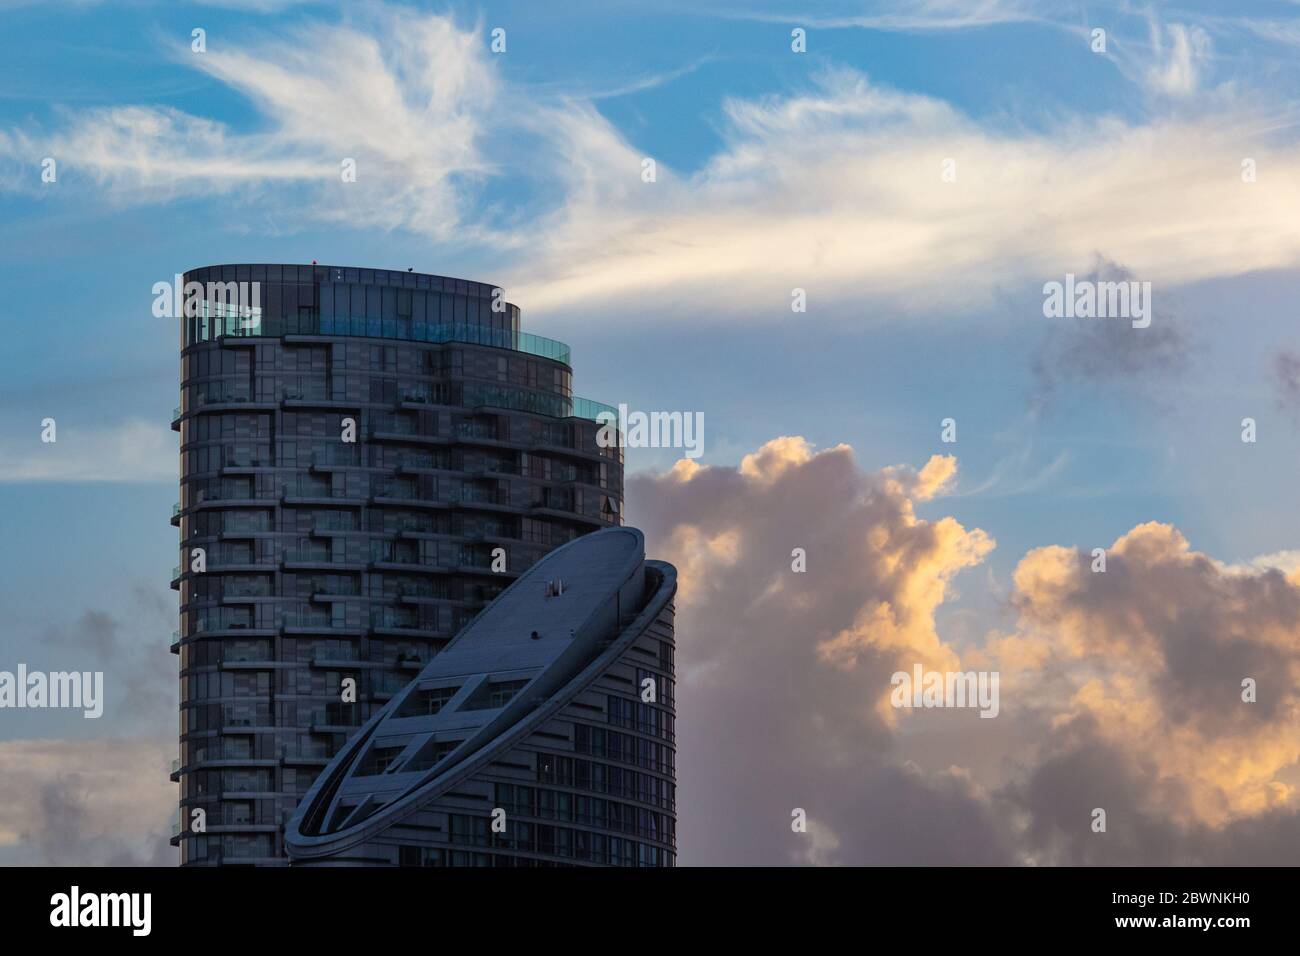 Evening sunset sky set against the Charrington and Ontario Towers at Blackwall, London Stock Photo